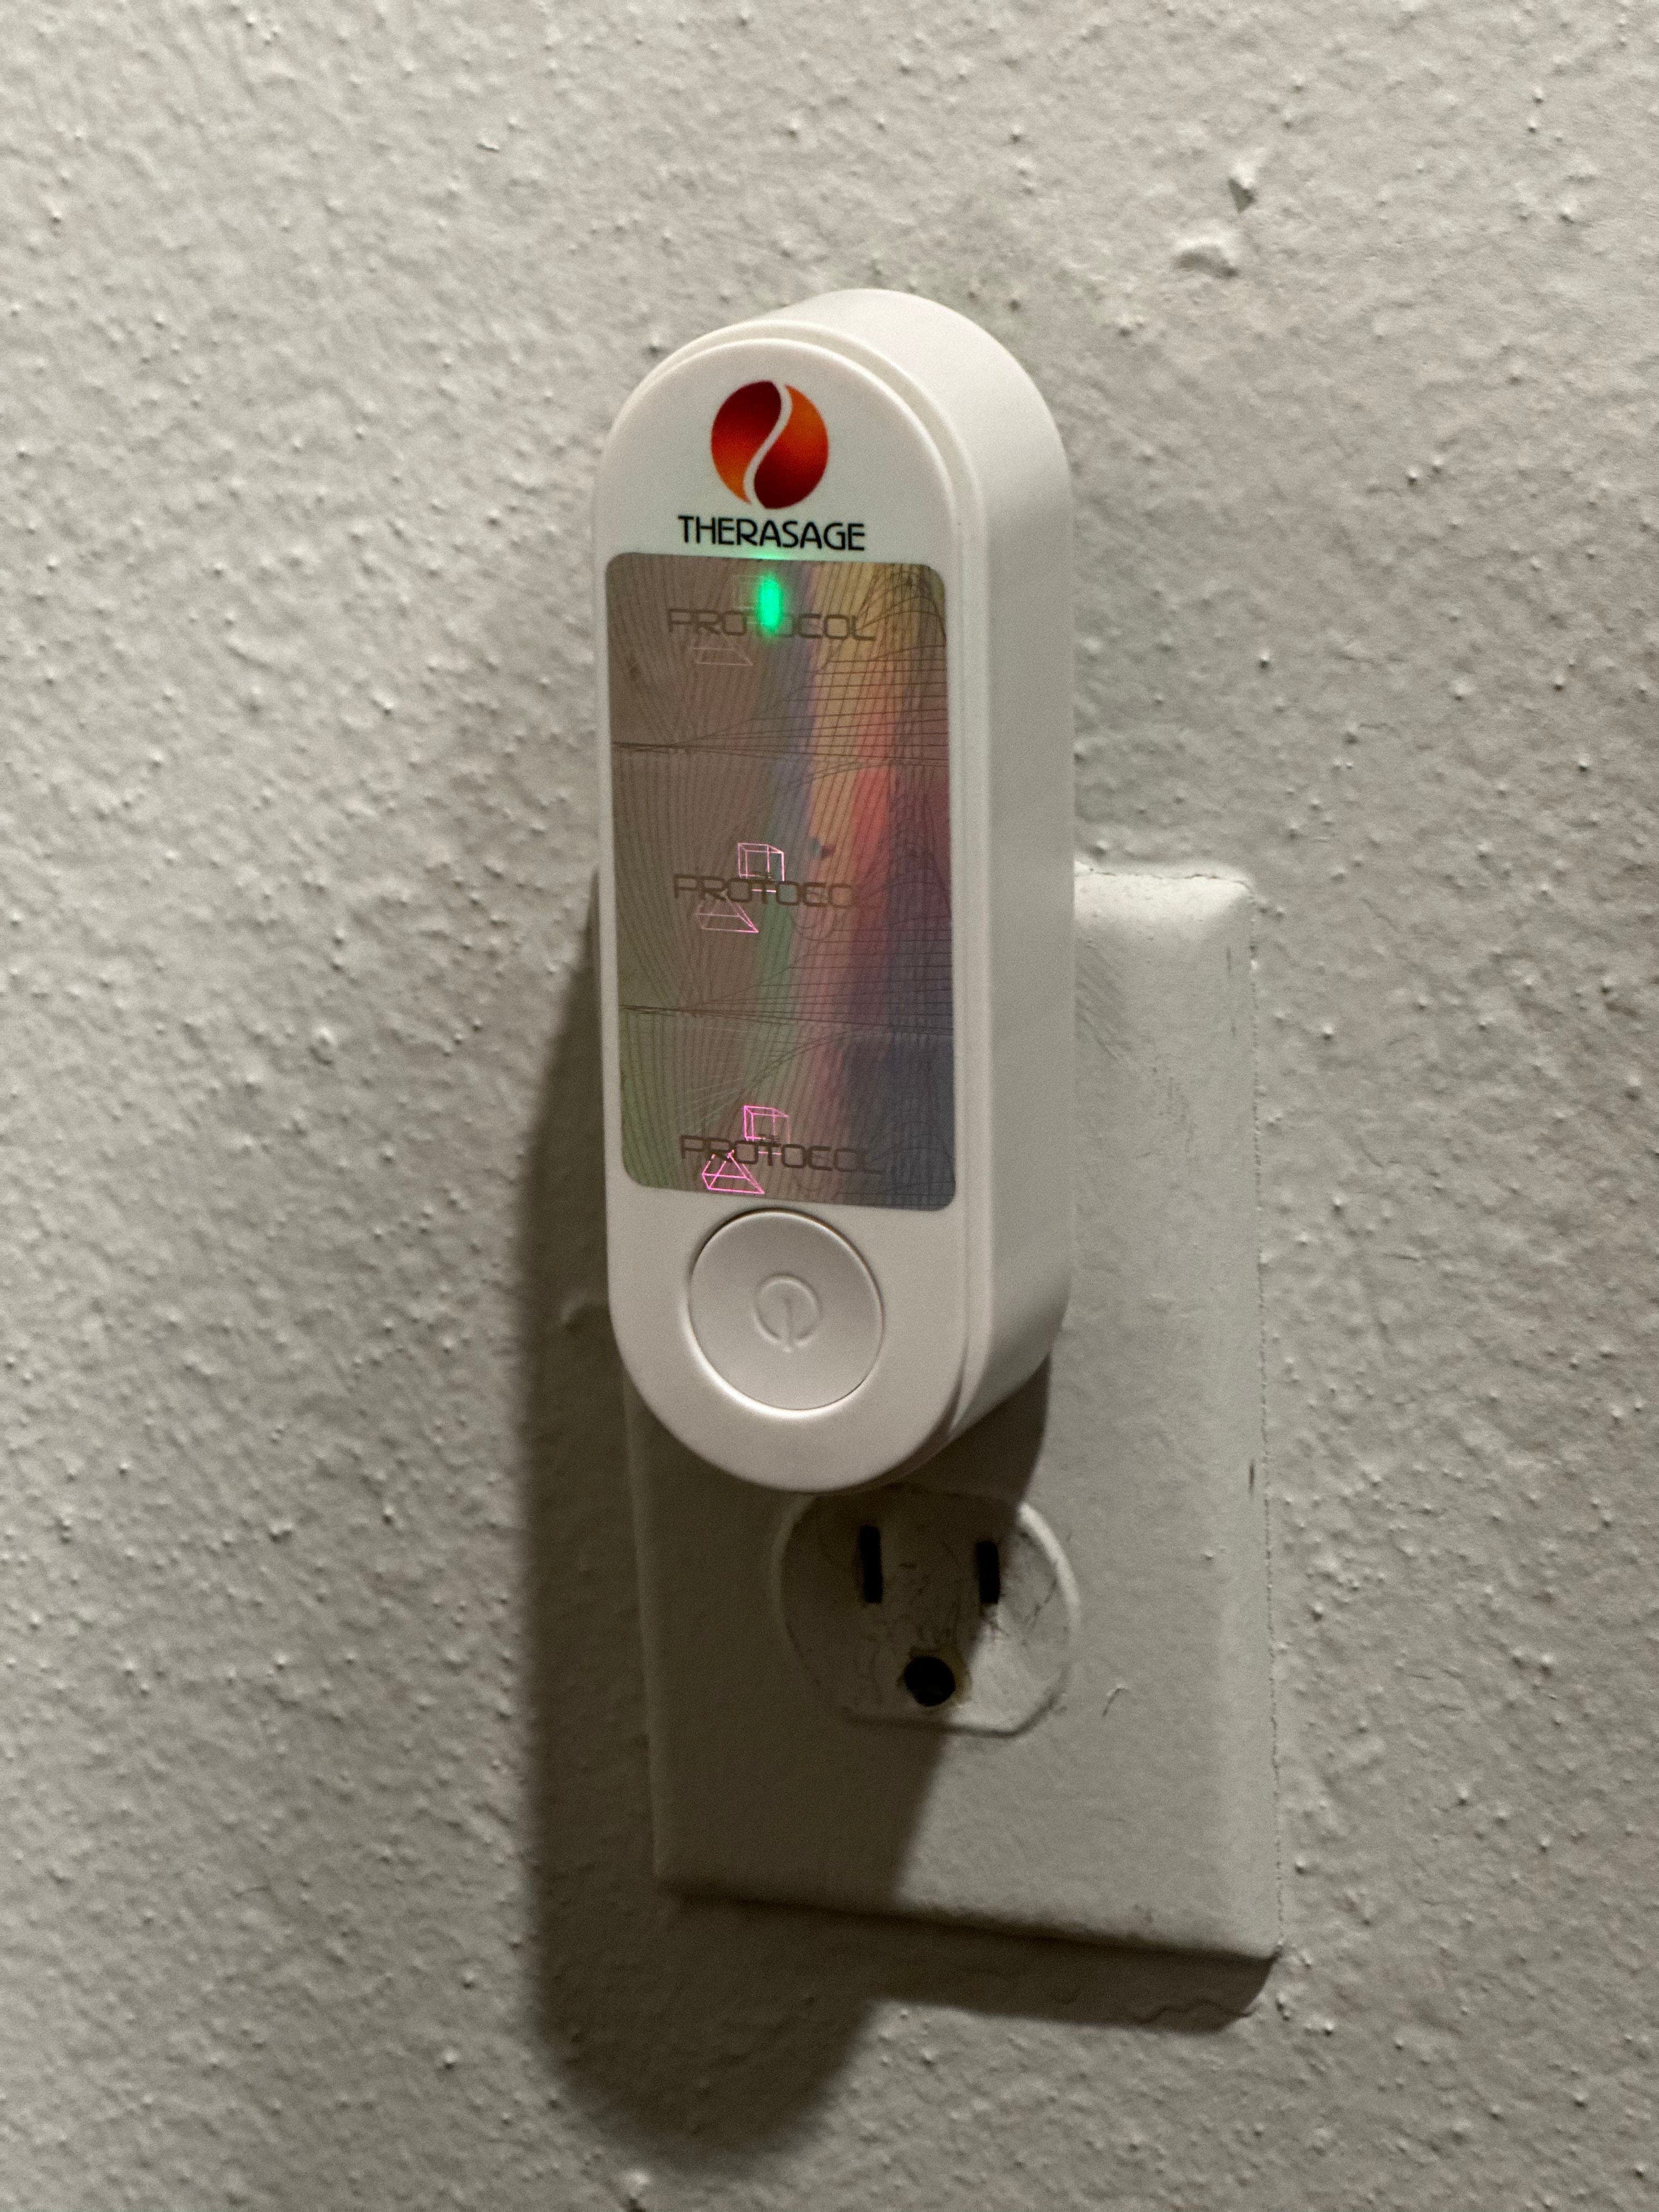 Therasage All Therasage TheraProtect EMF Home Harmonizer